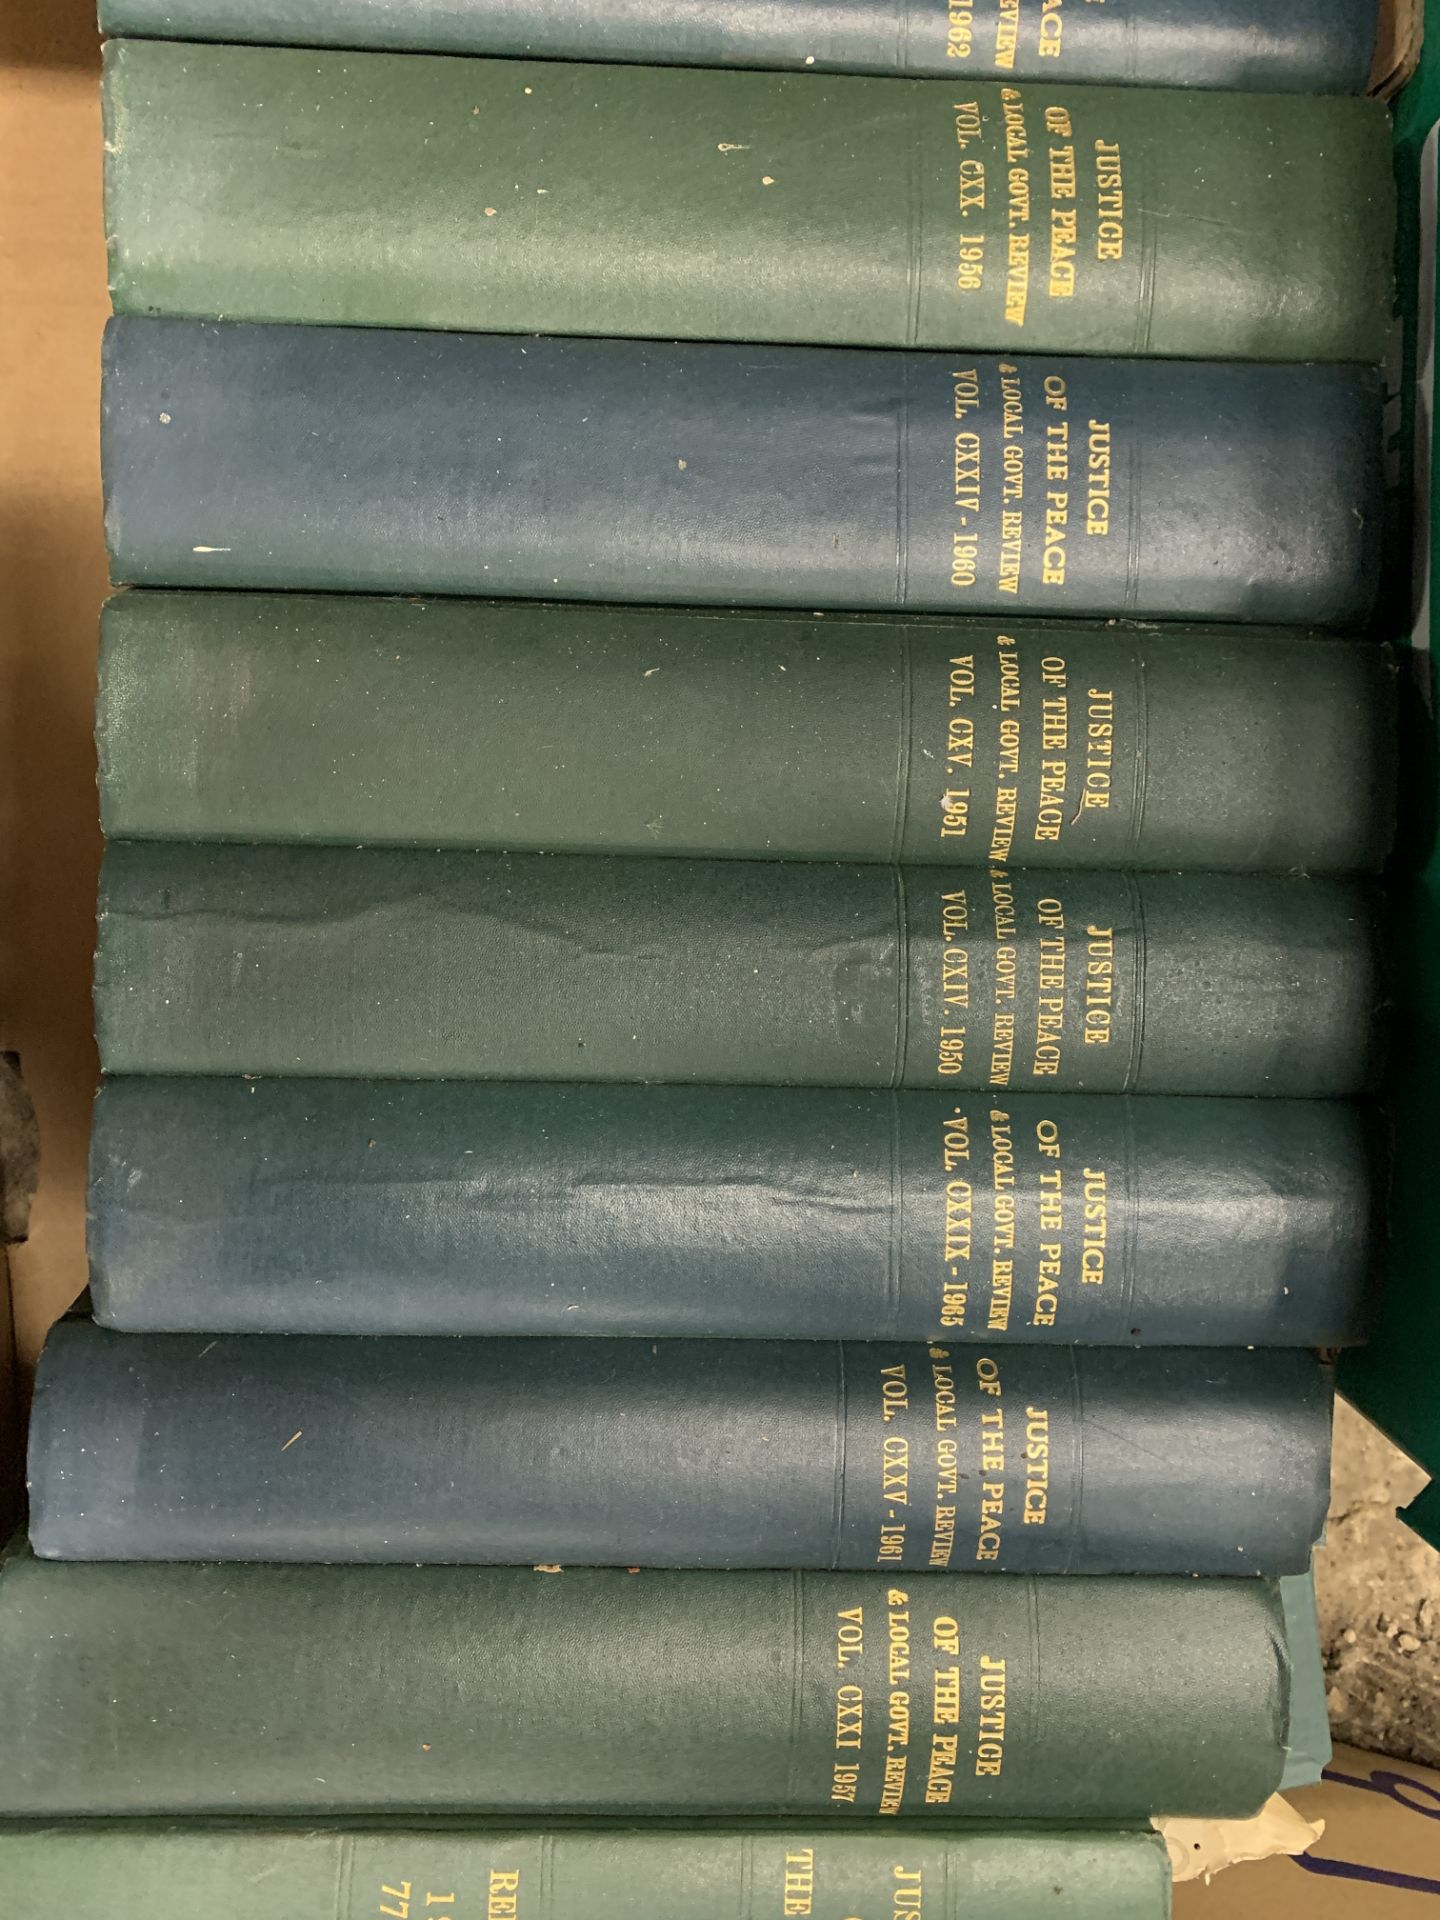 17 volumes of Justice of the Peace. - Image 2 of 2